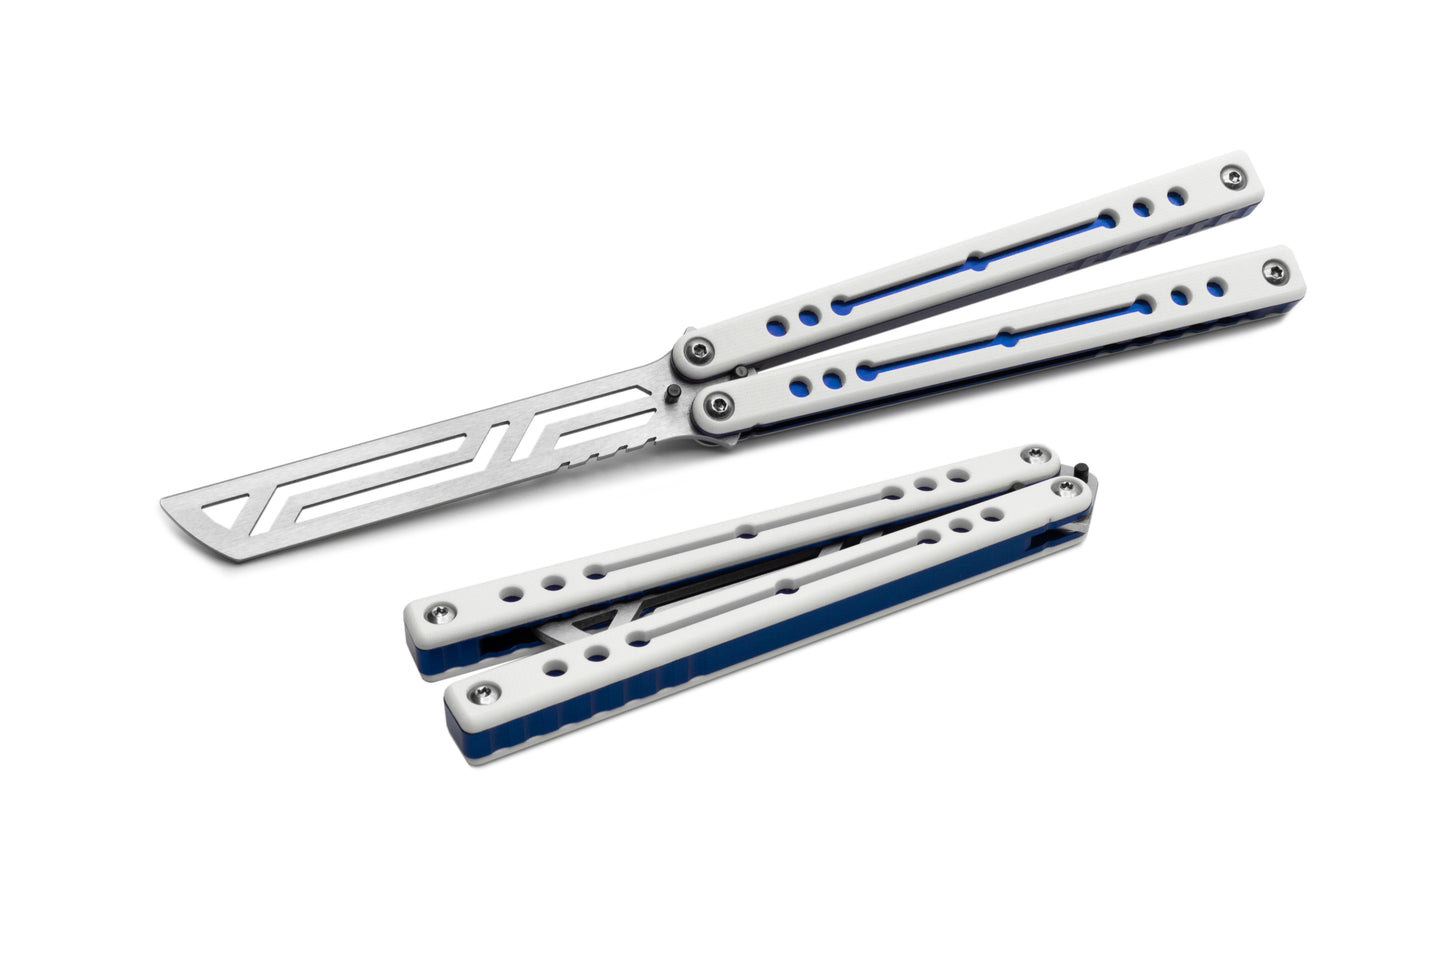 Winter blue NautilusV2 balisong with g10 scales